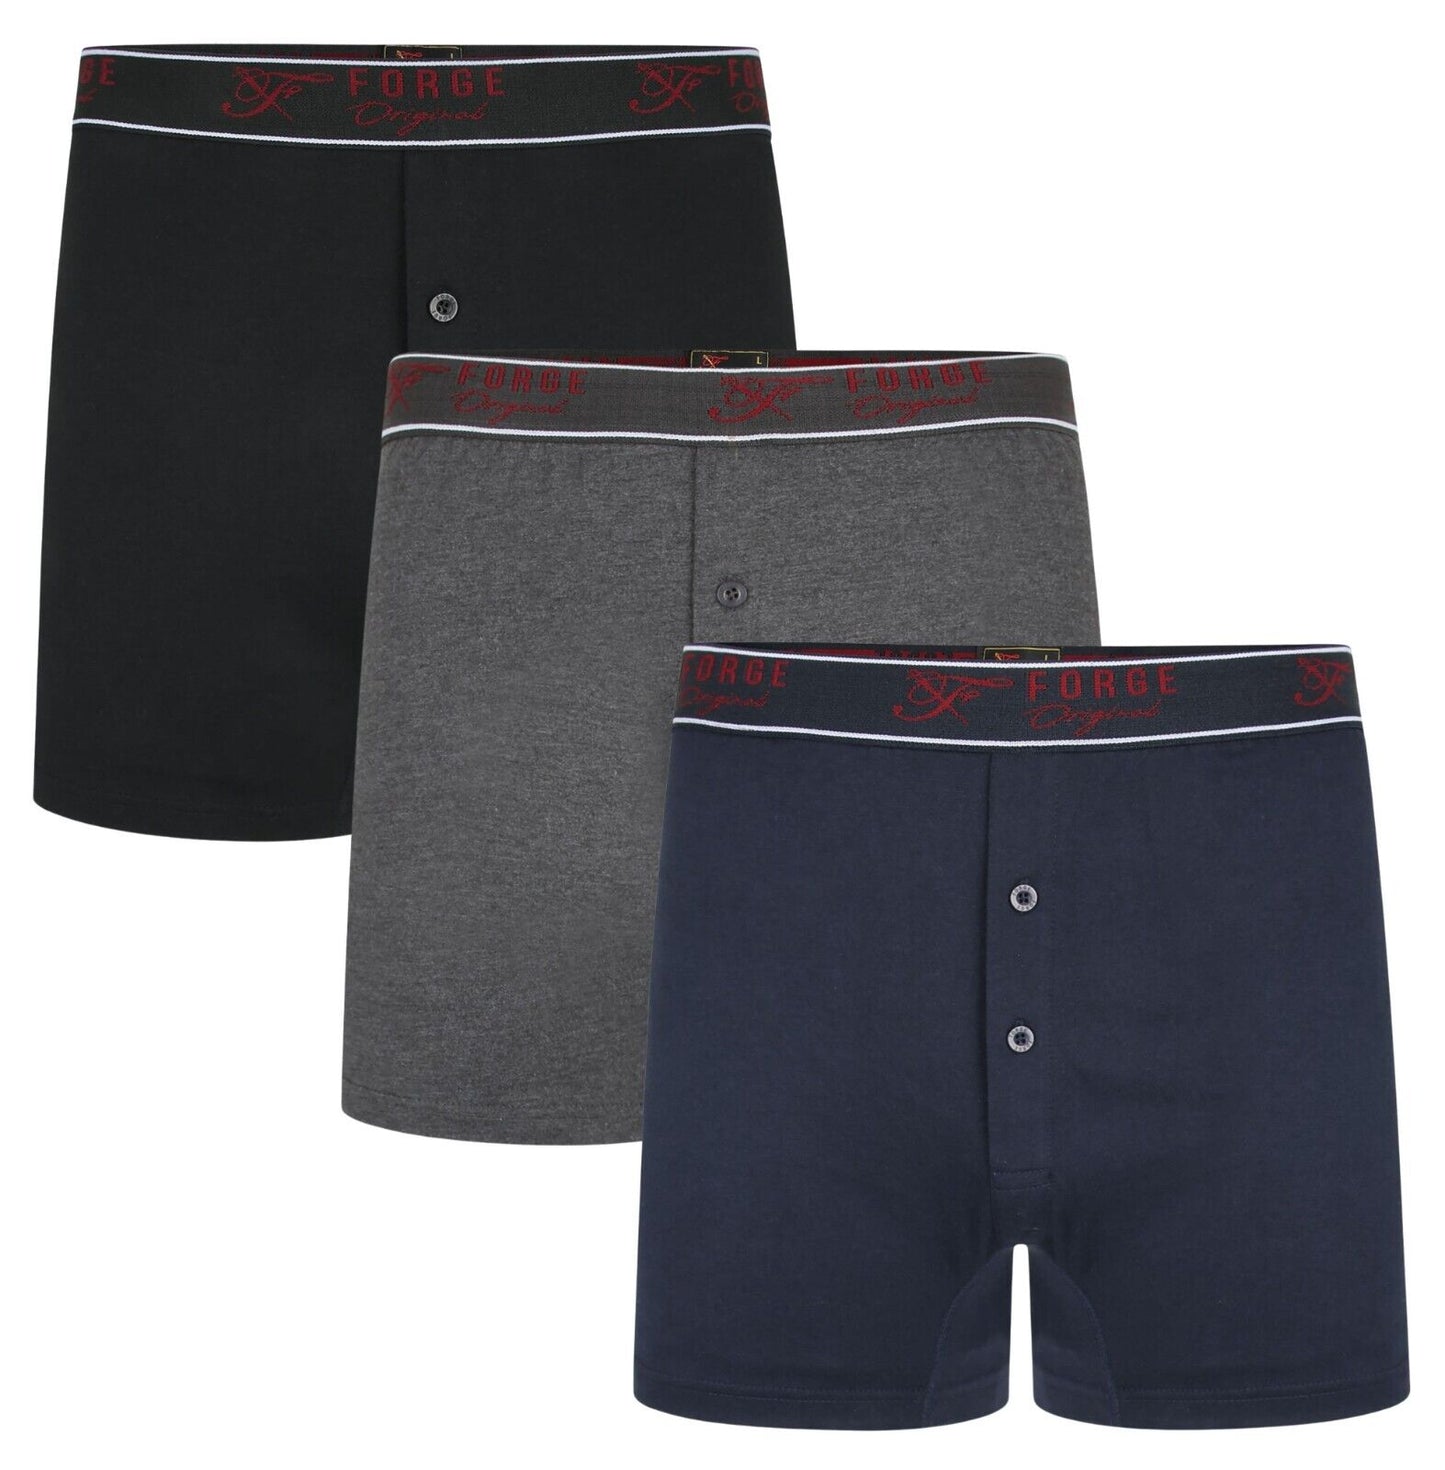 Mens 3 Pack Forge Boxer Shorts Trunks Cotton Underwear Button Fly Underpants